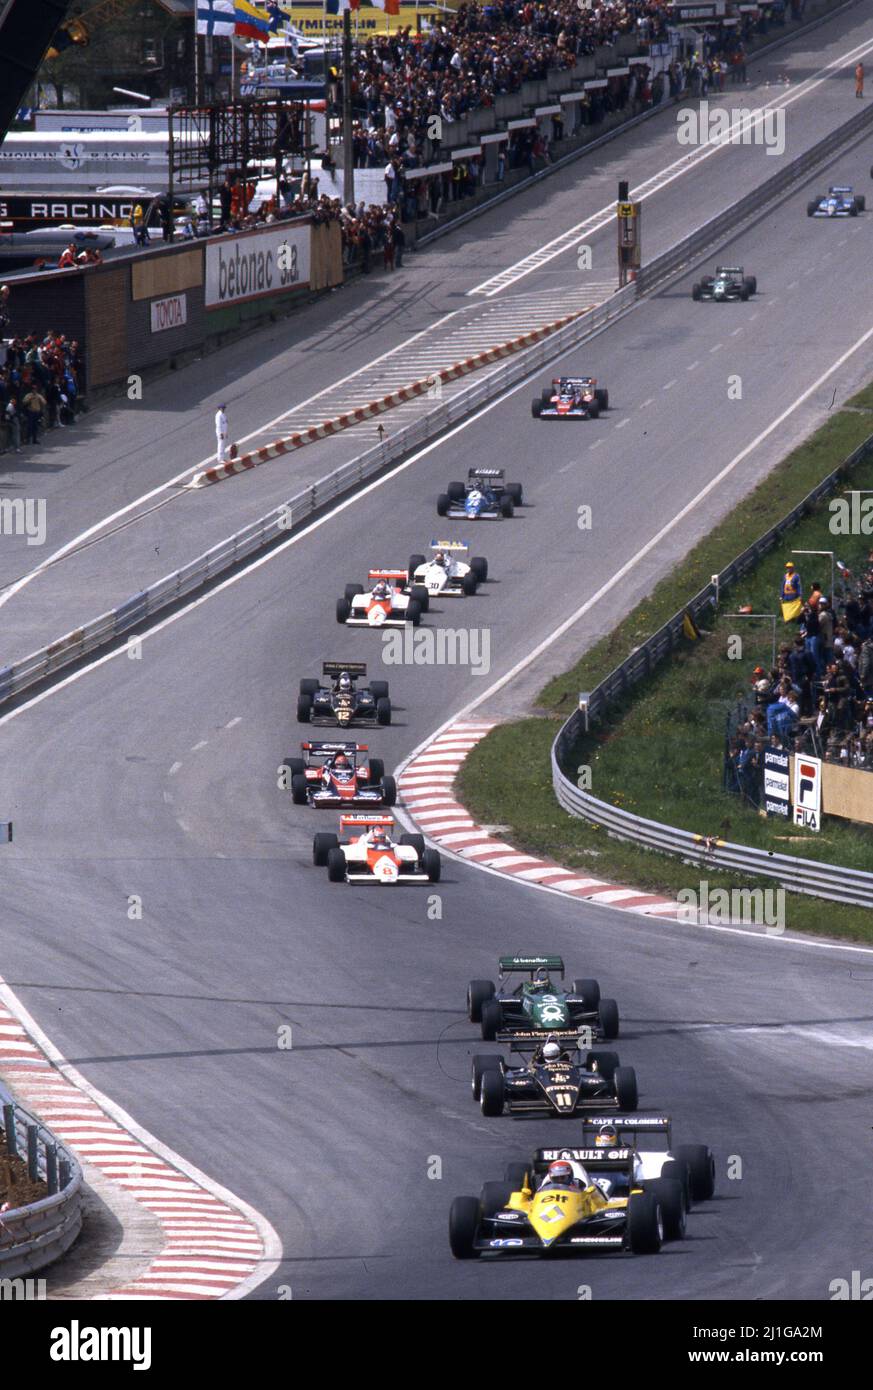 Eddie Cheever (USA) Renault RE 40 3rd position leads a group at Eau Rouge Radillon corner Stock Photo